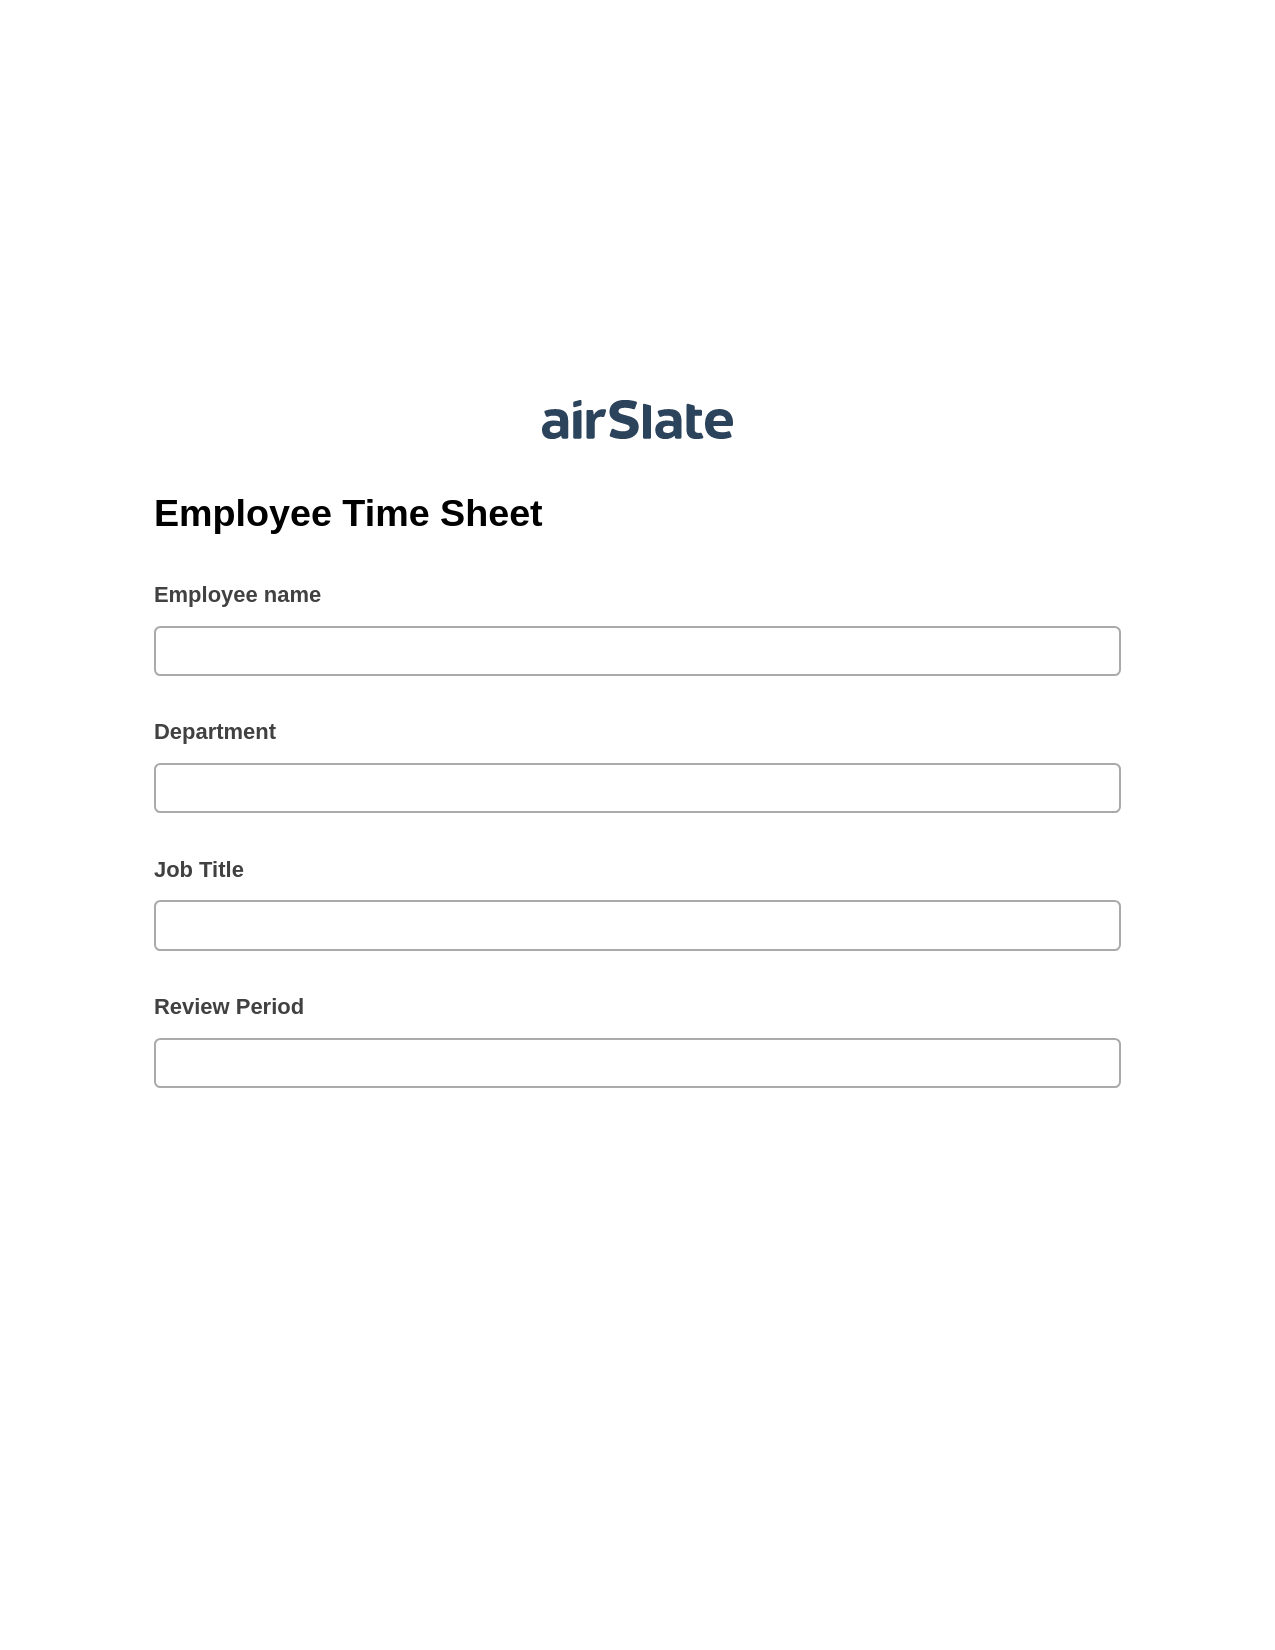 Employee Time Sheet Pre-fill Document Bot, Export to MS Dynamics 365 Bot, Export to Smartsheet